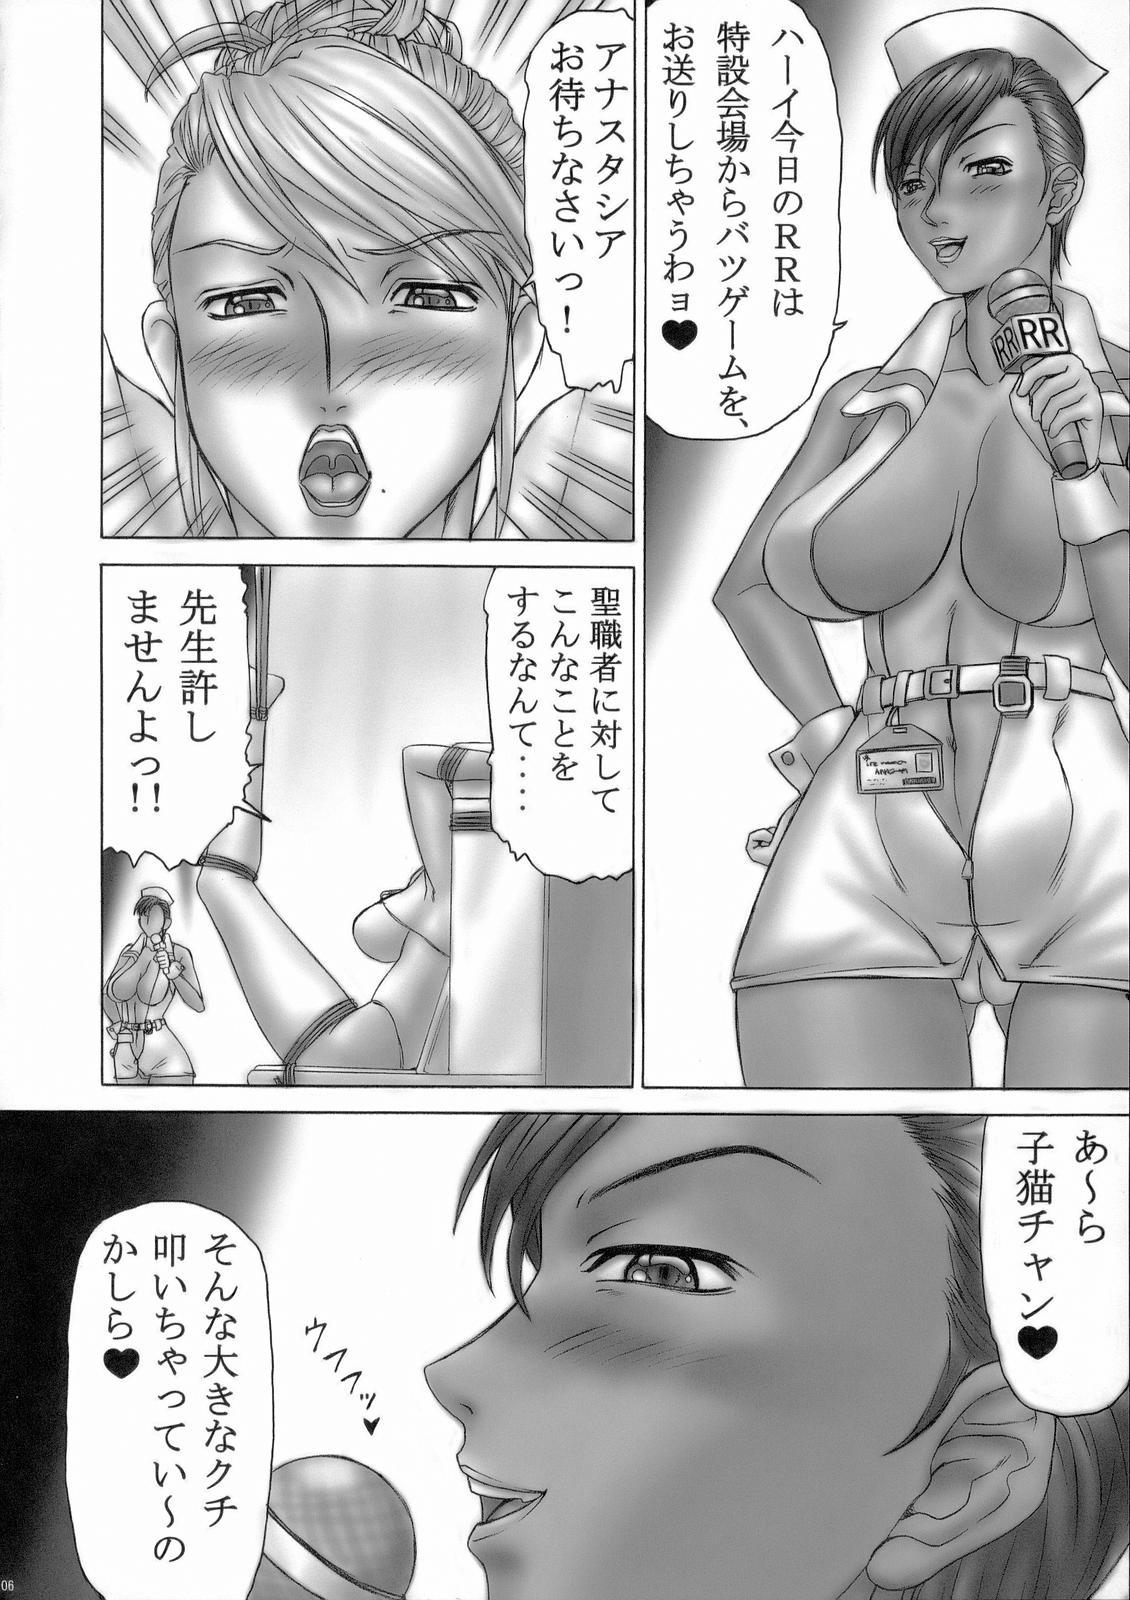 Doll RUMBLE-X - Rumble roses Petite Teen - Page 5